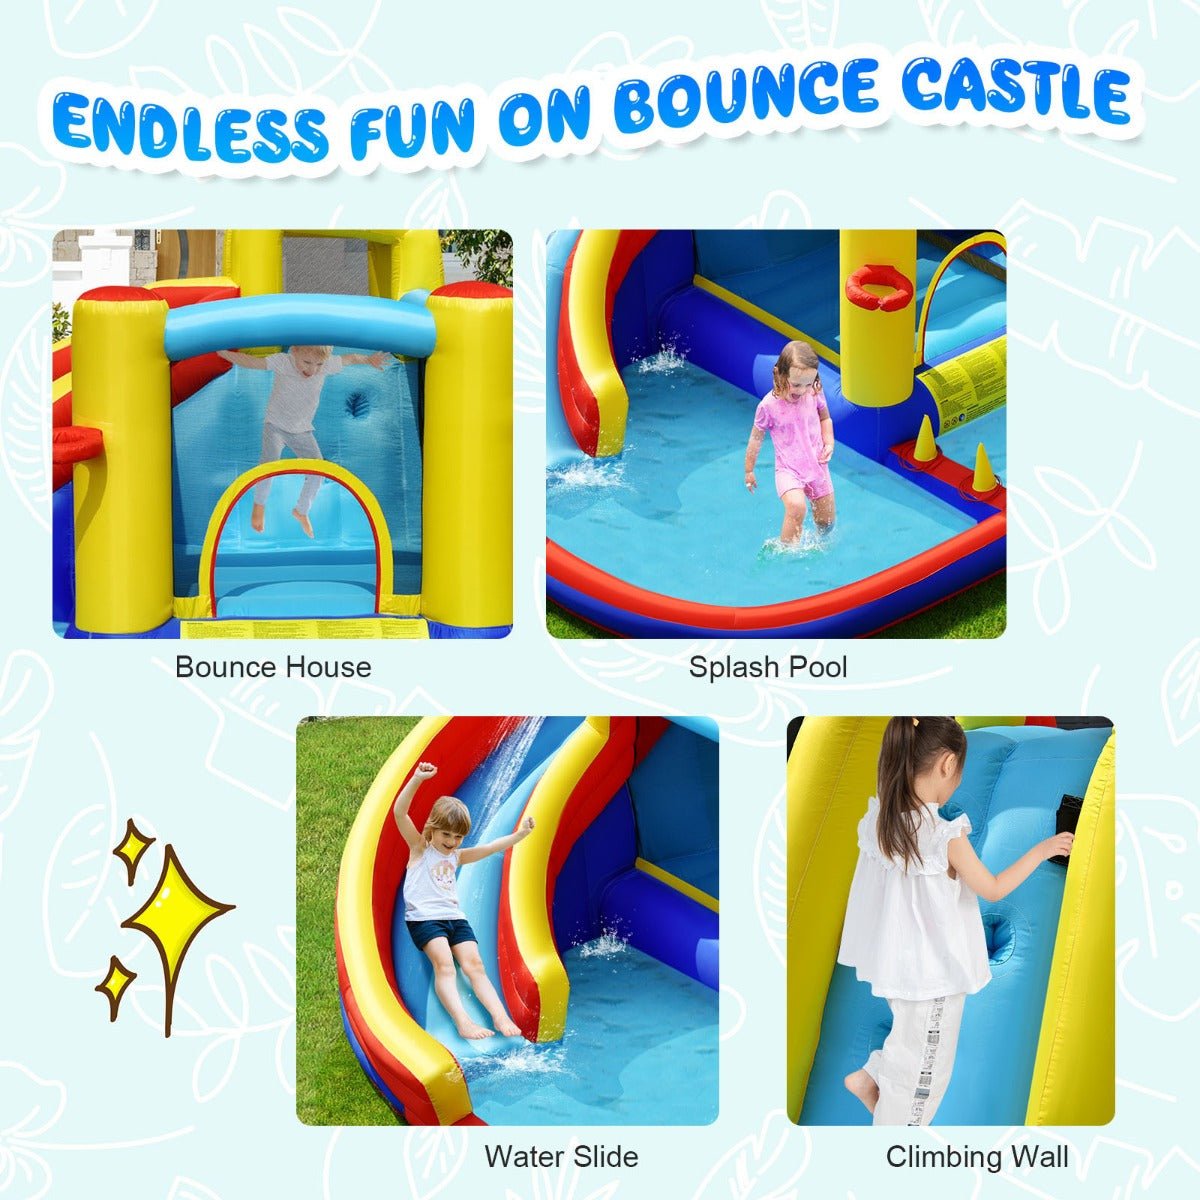 Adventure Awaits with Our 7-in-1 Bounce Castle